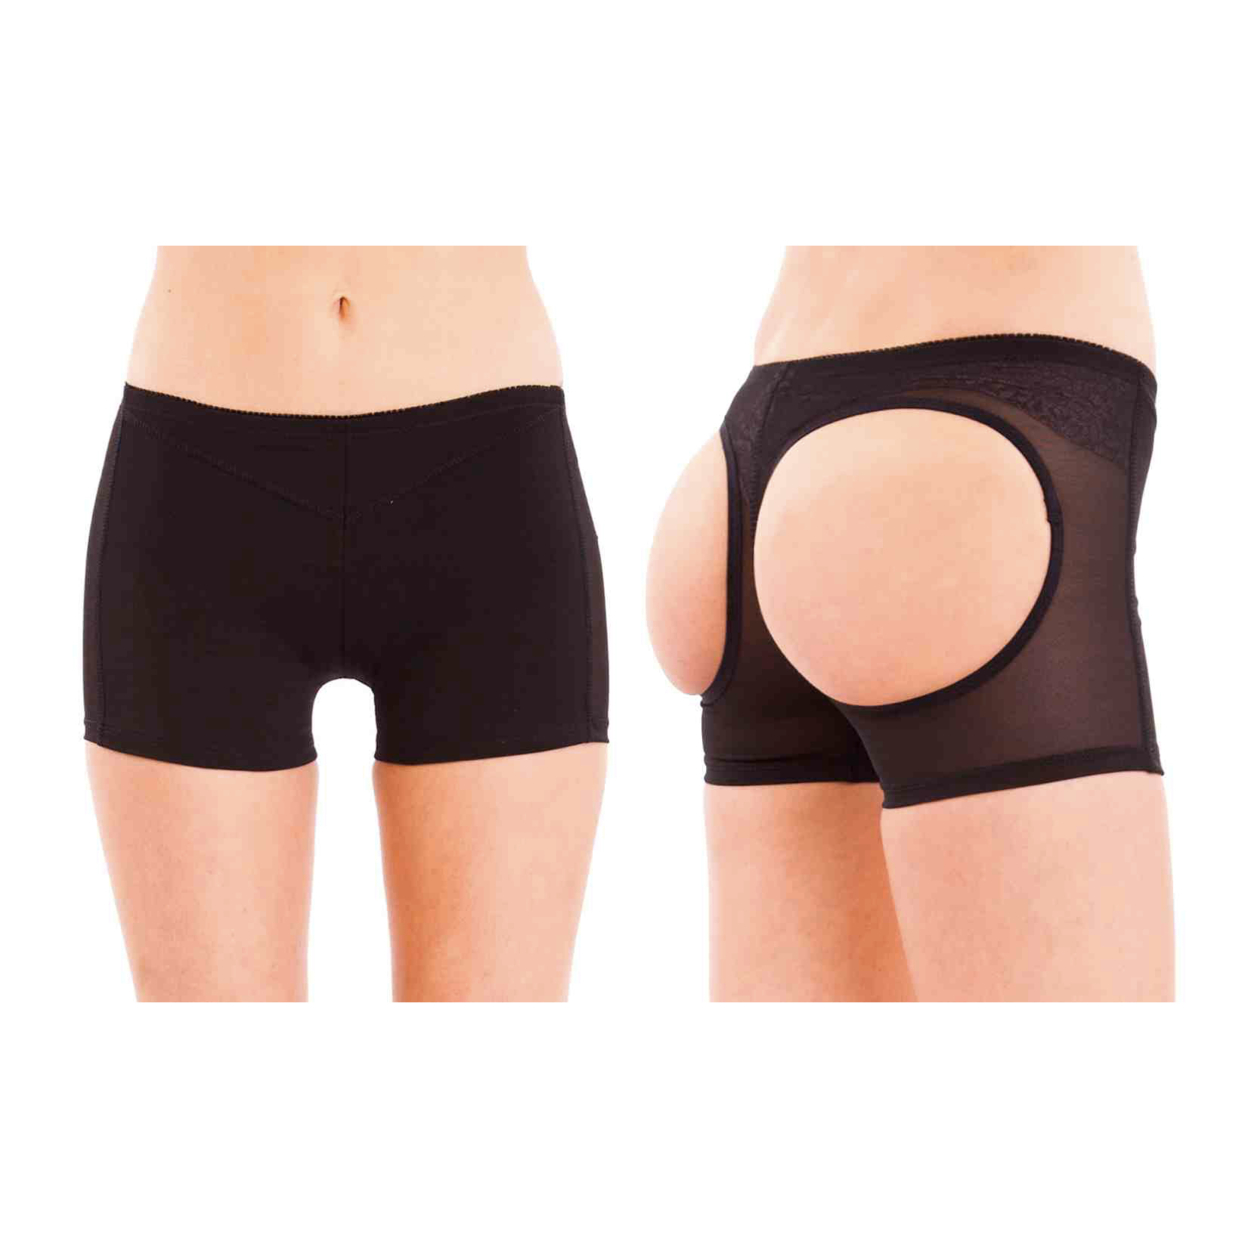 Women's Butt-Lifting And Tummy-Control Brief - Black, M